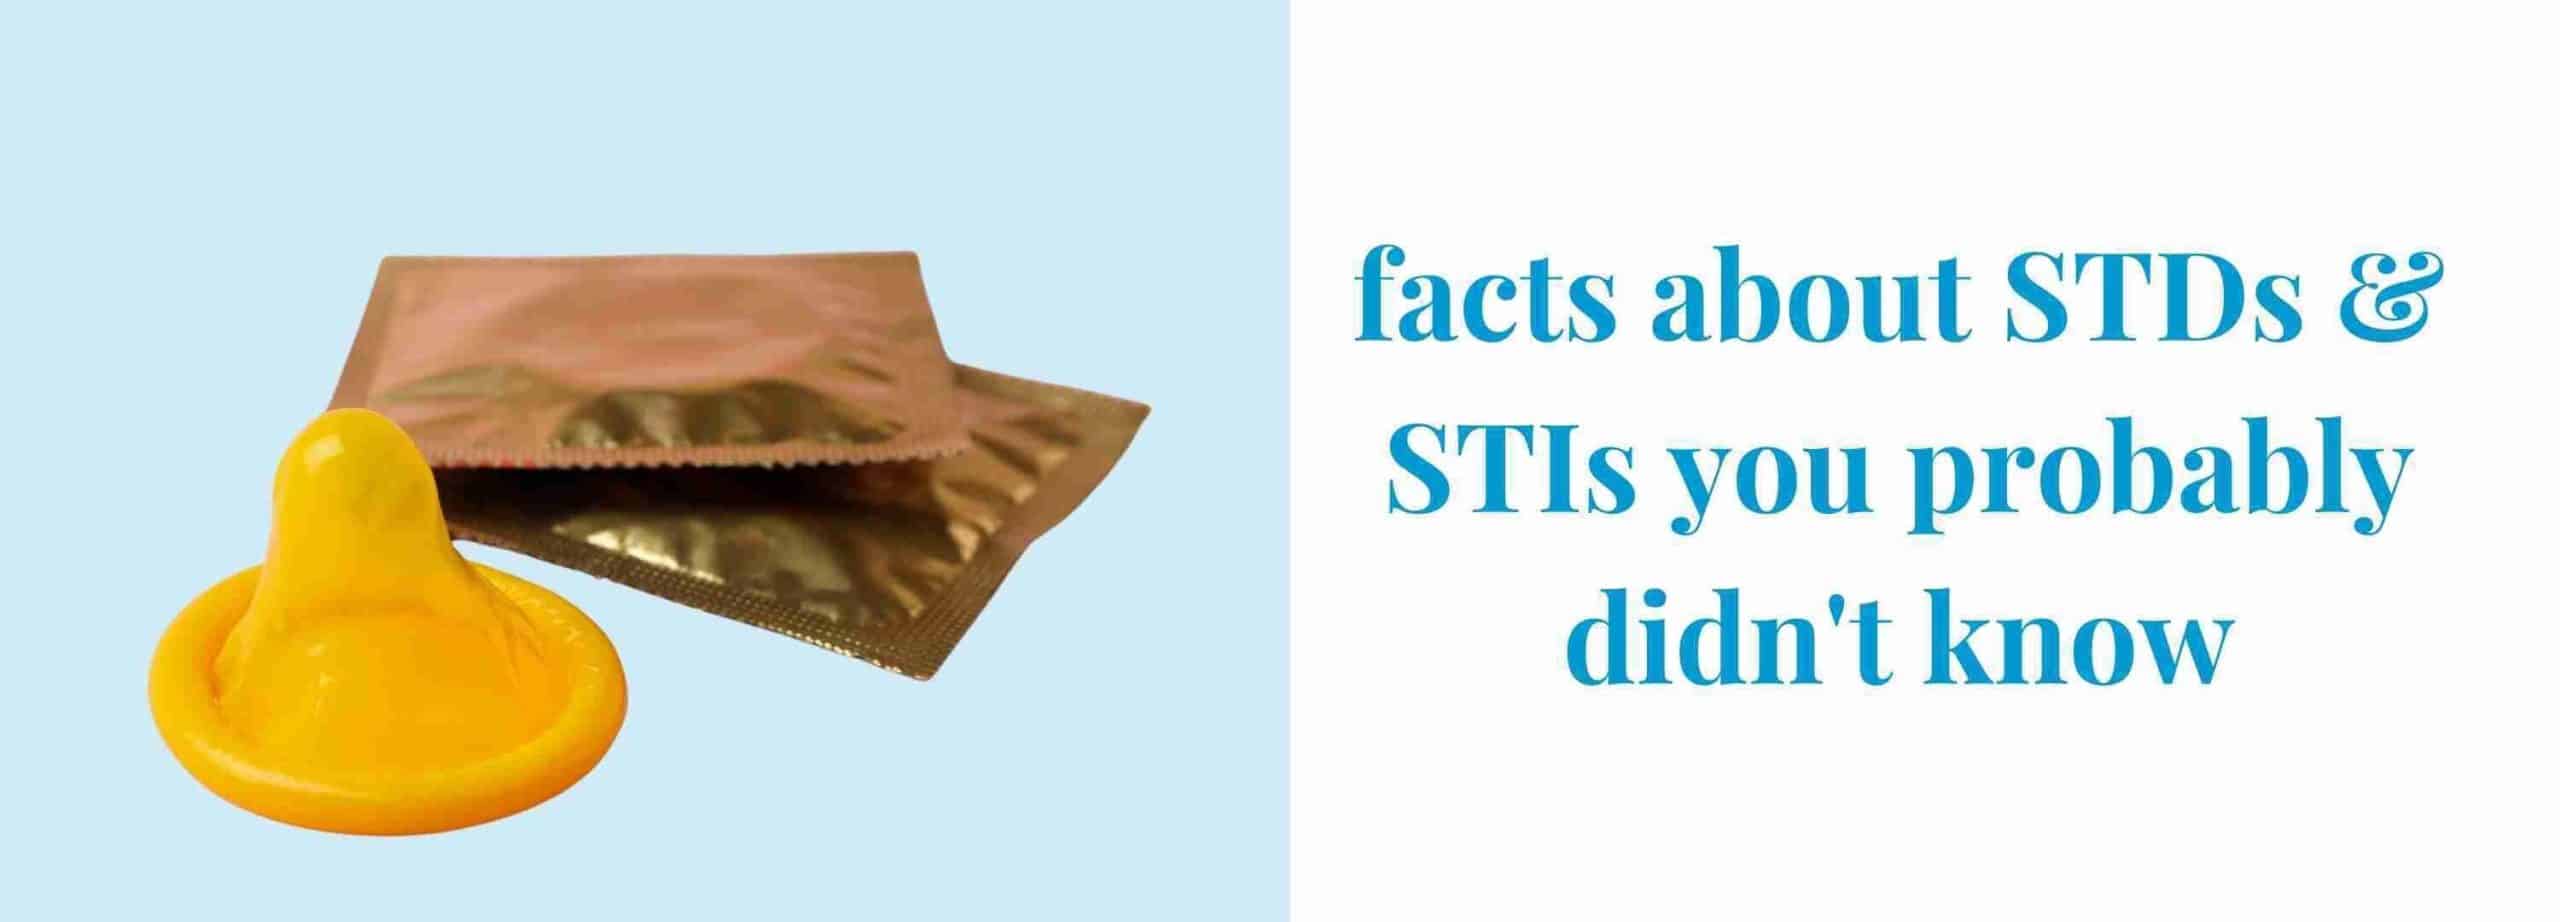 Facts About STDs Everyone Should Know